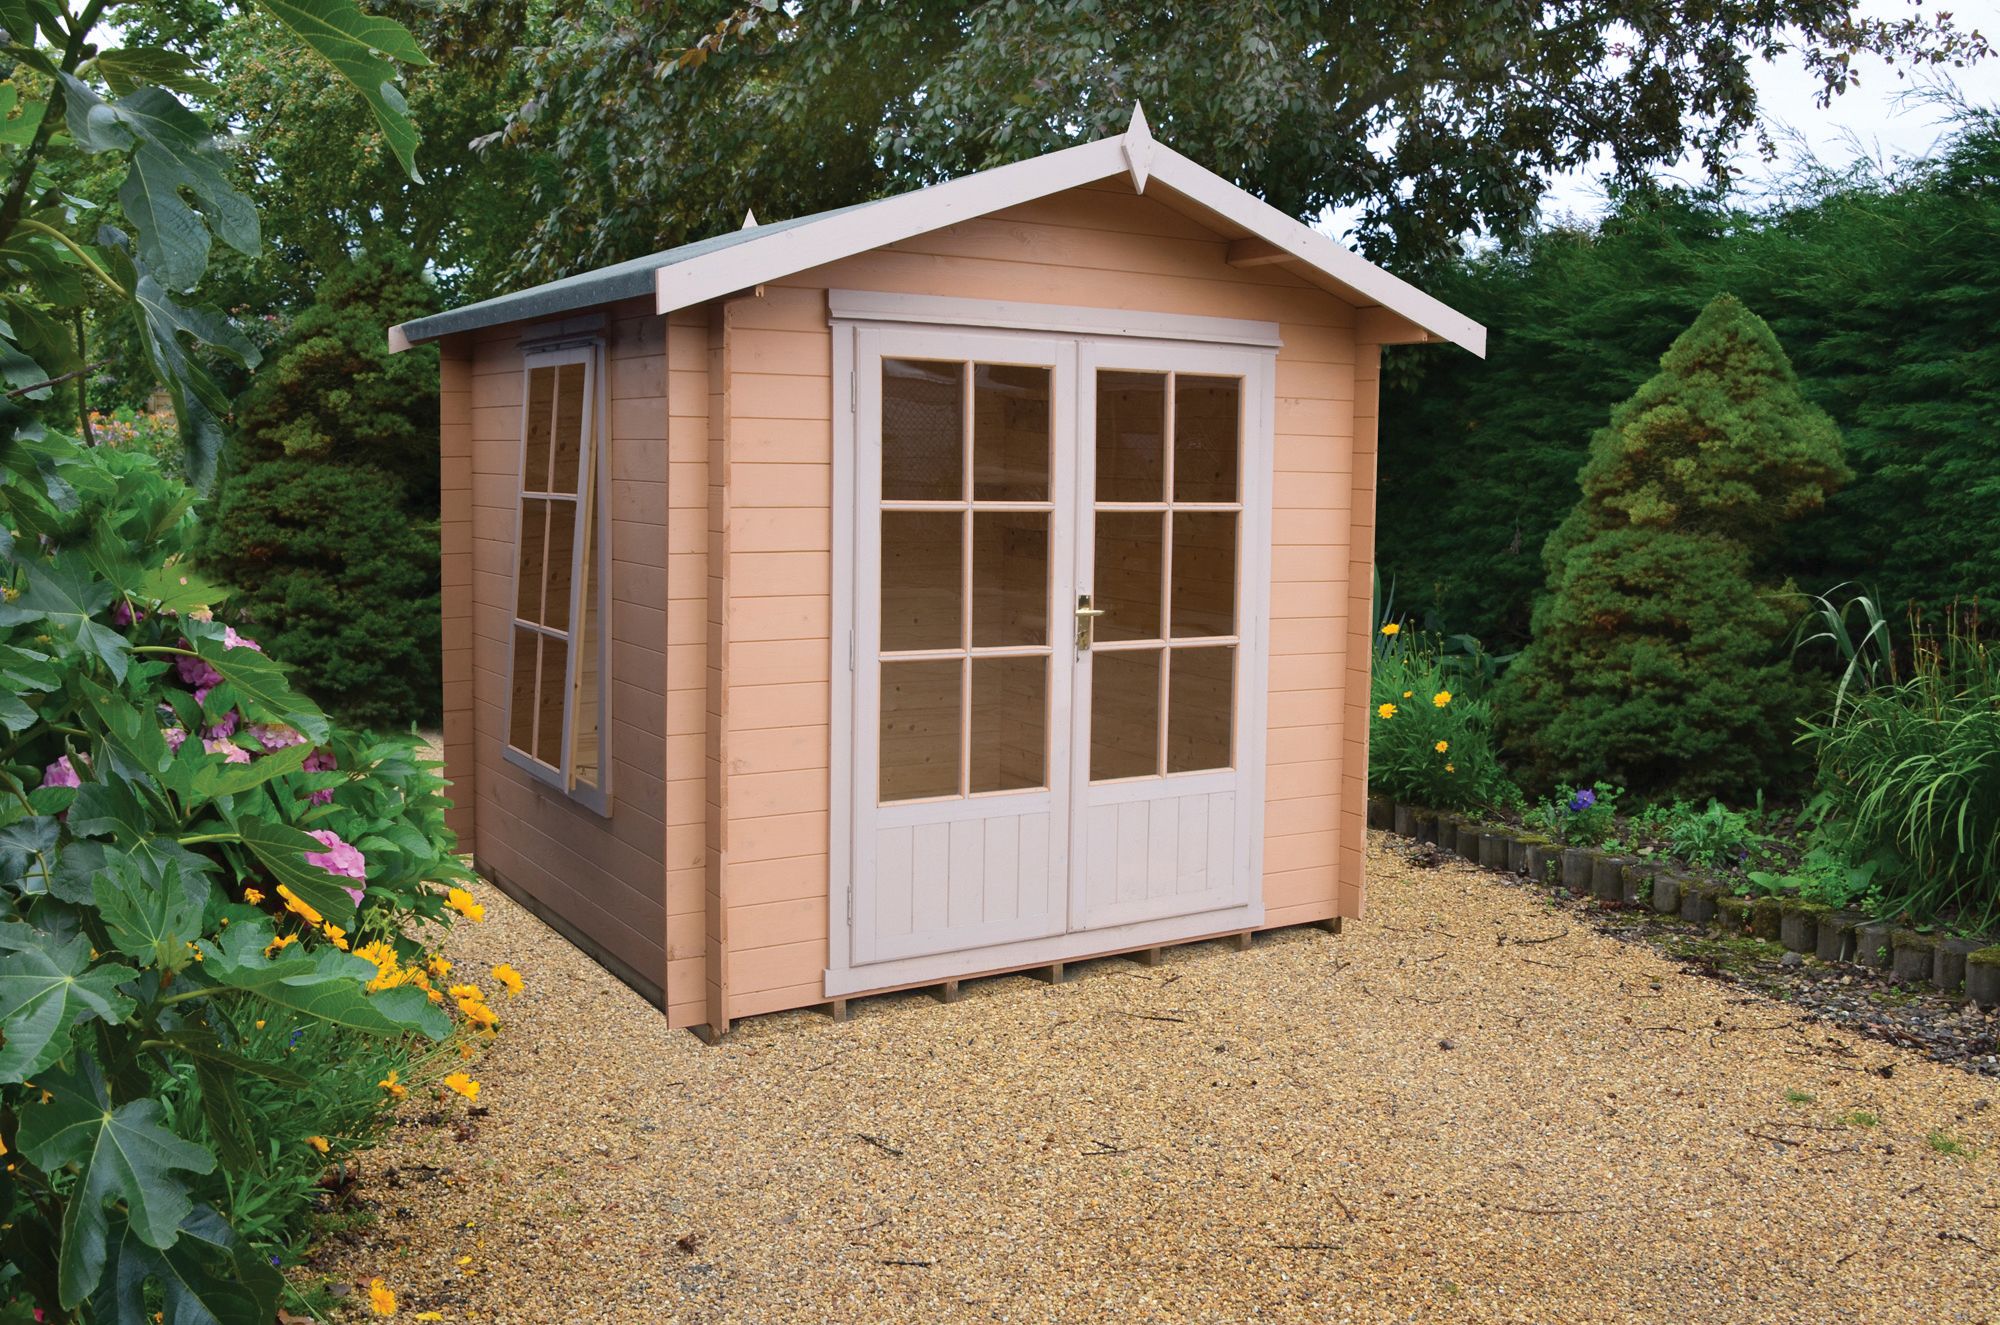 Shire 7 x 7 ft Barnsdale Double Door Log Cabin